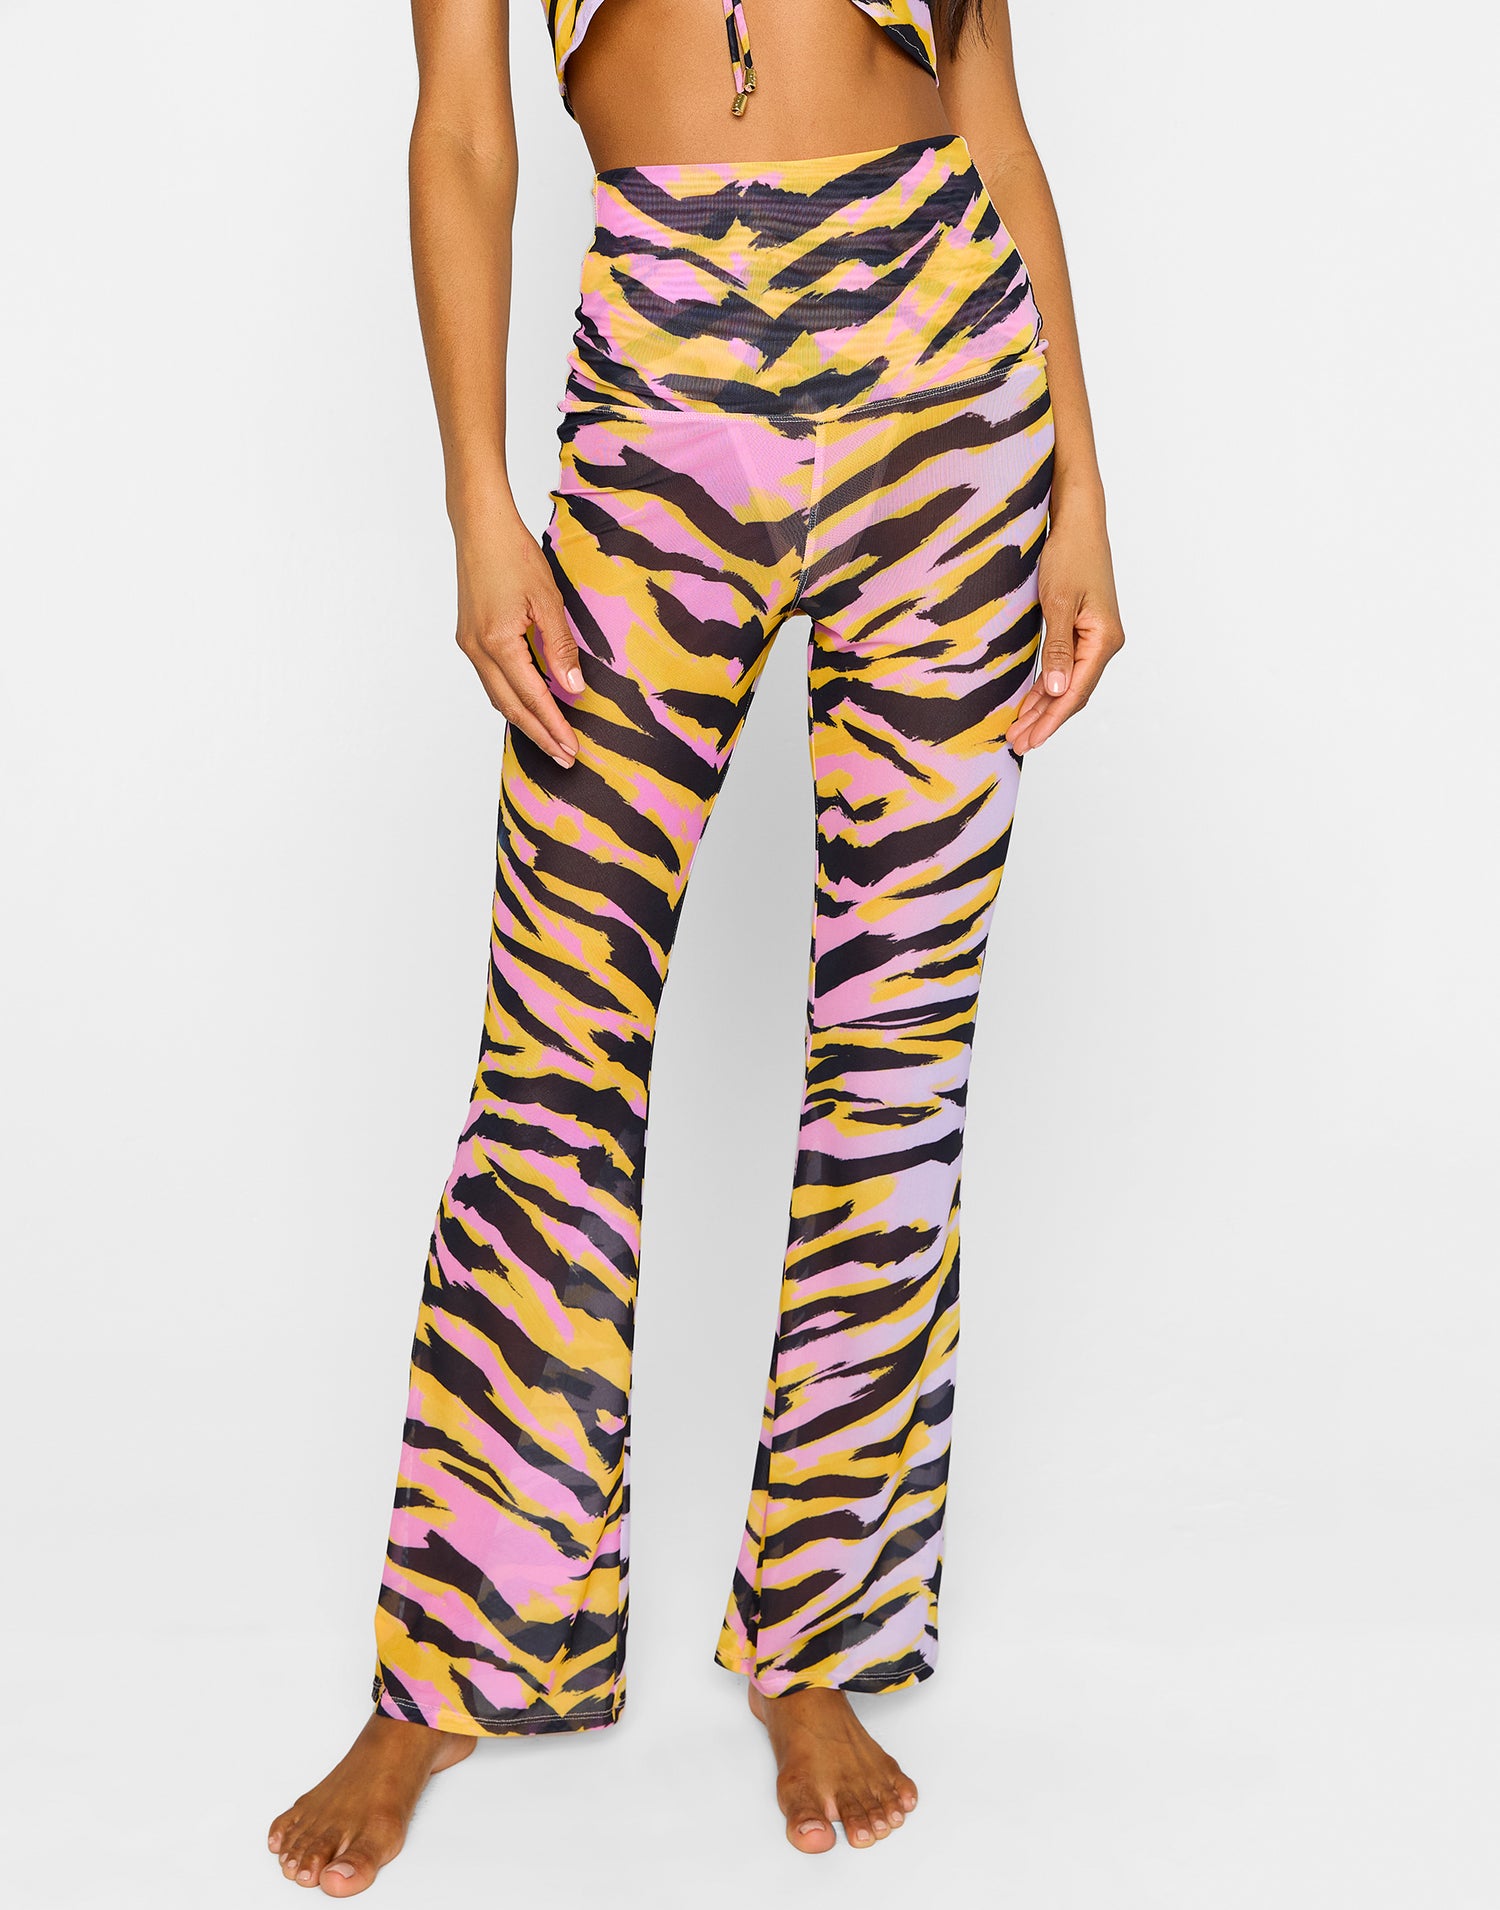 Clara Pant Cover Up in Cabana Animal with Fold Over Waistband - Front Detail View